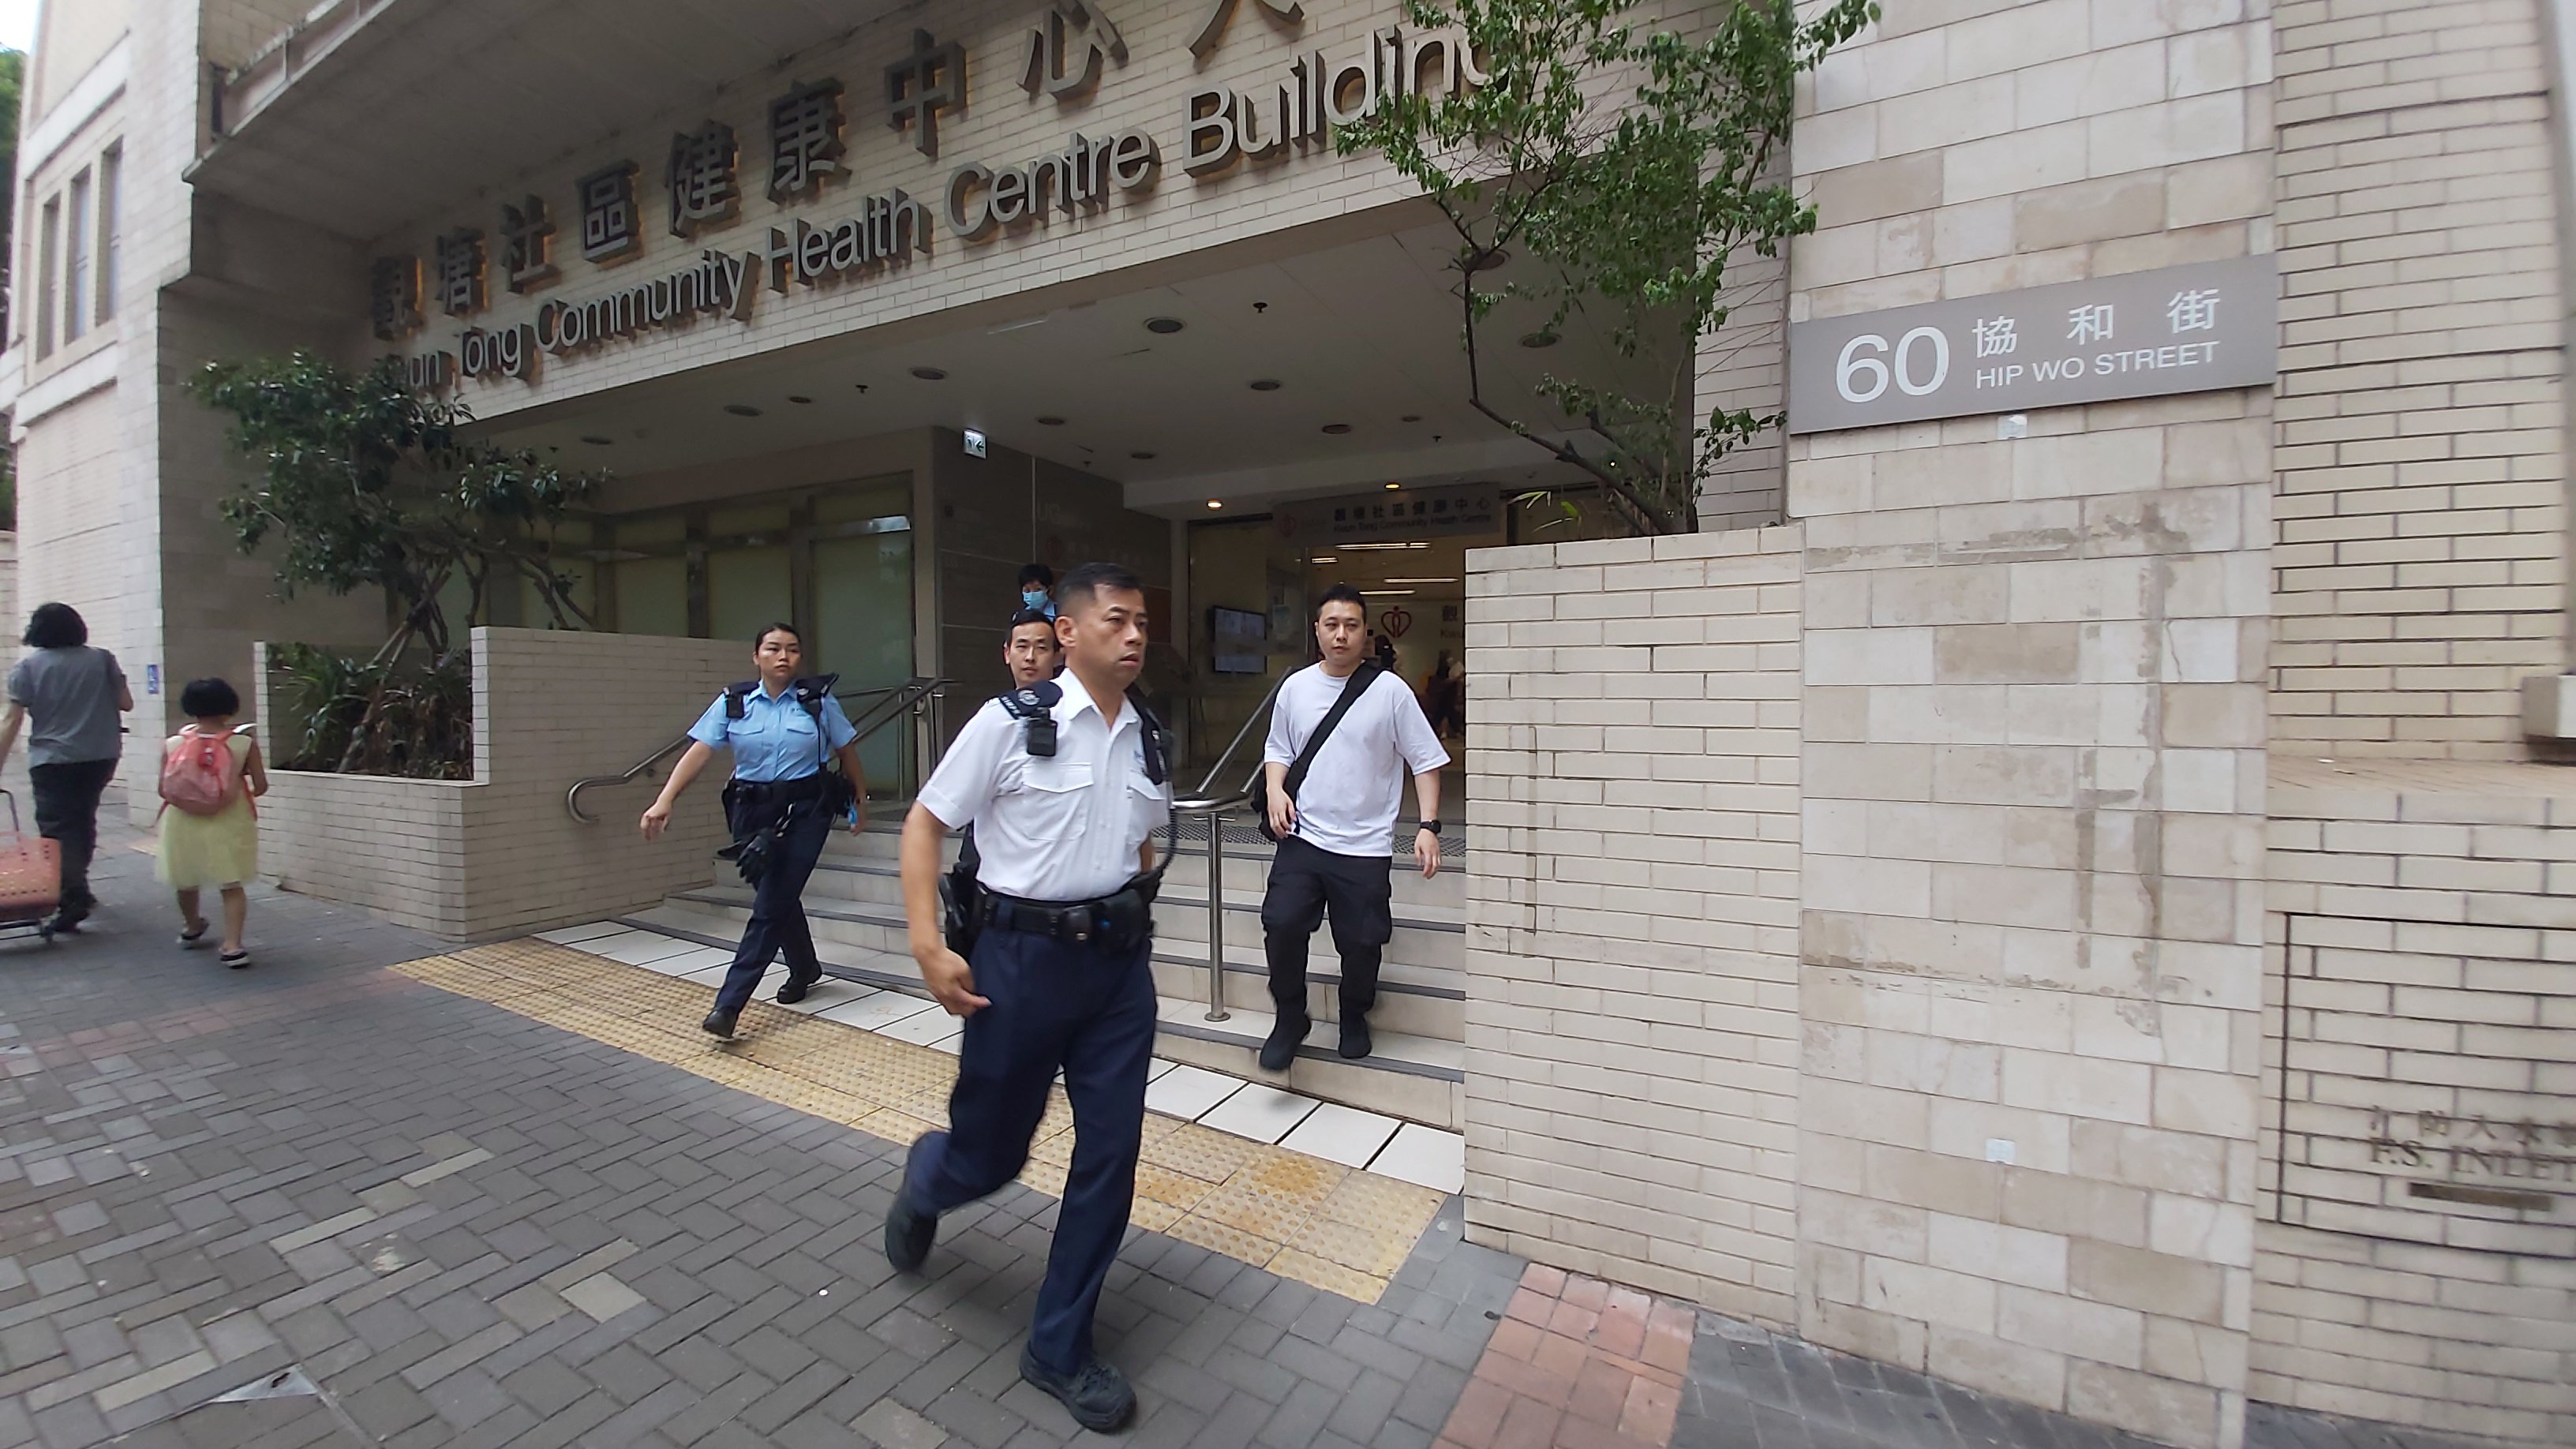 The incident at Kwun Tong Community Health Centre occurred just before 3pm. Photo: SCMP